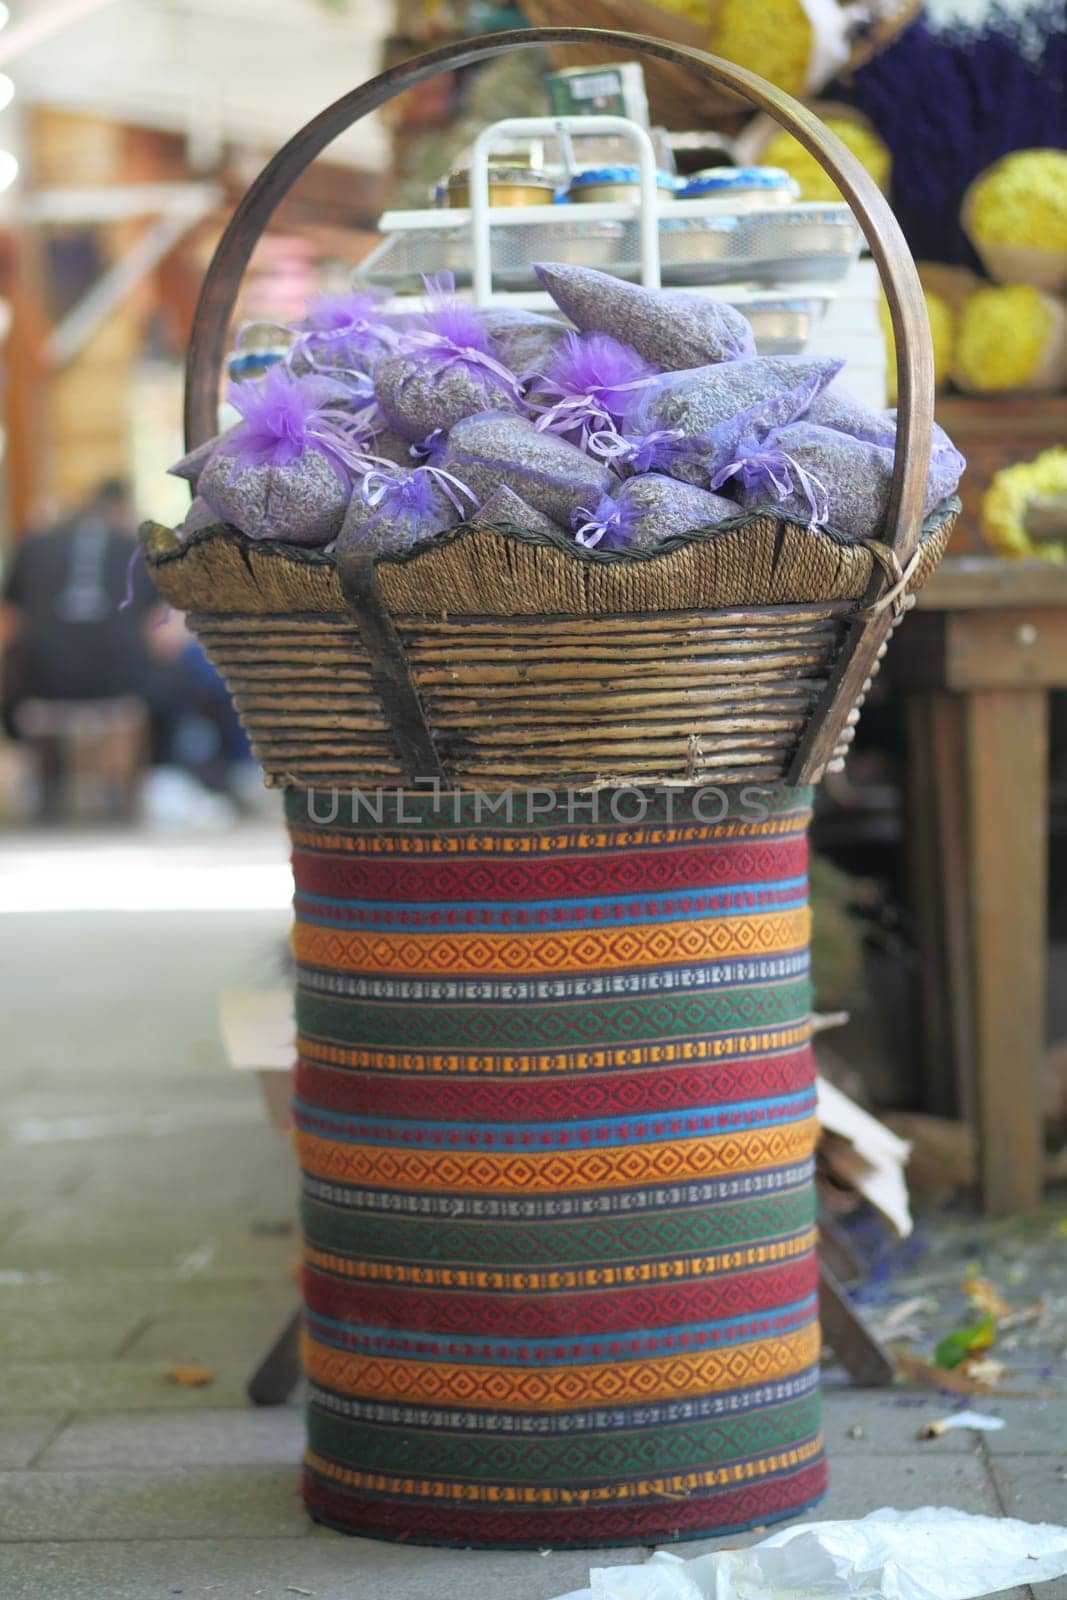 Pouch with lavender in a wooden basket